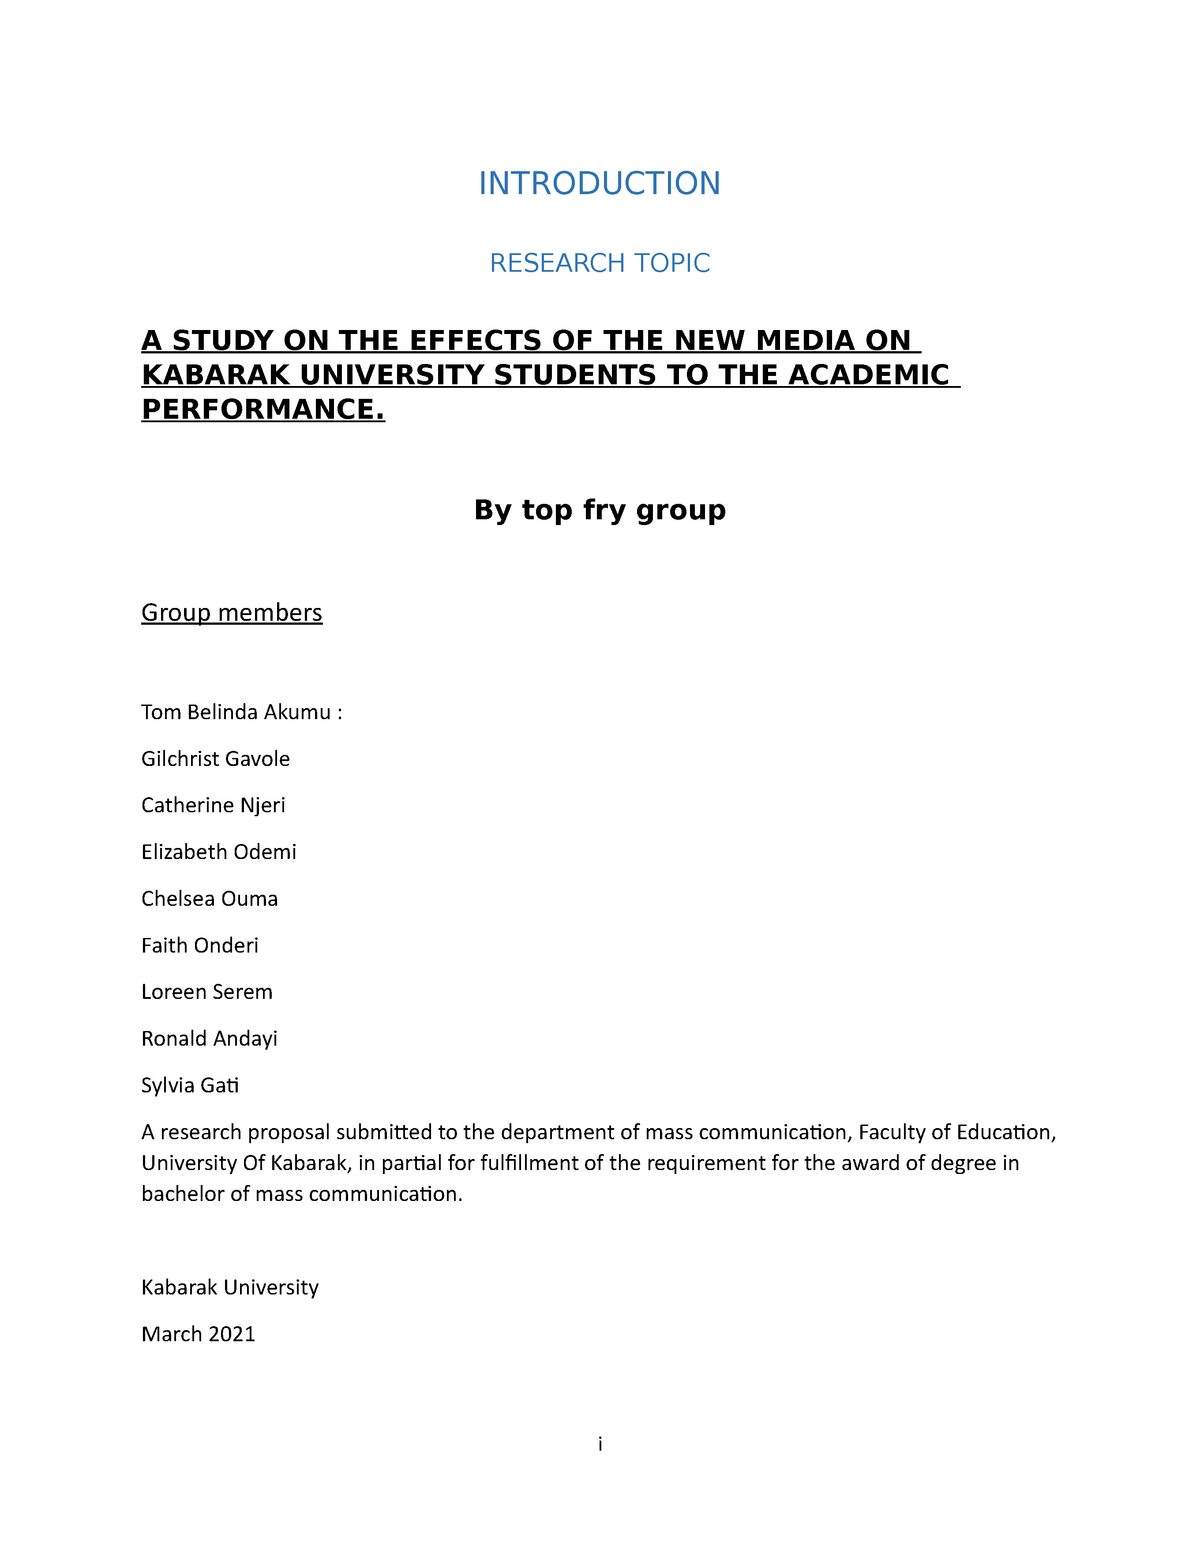 Communication skills proposal assignment for first years